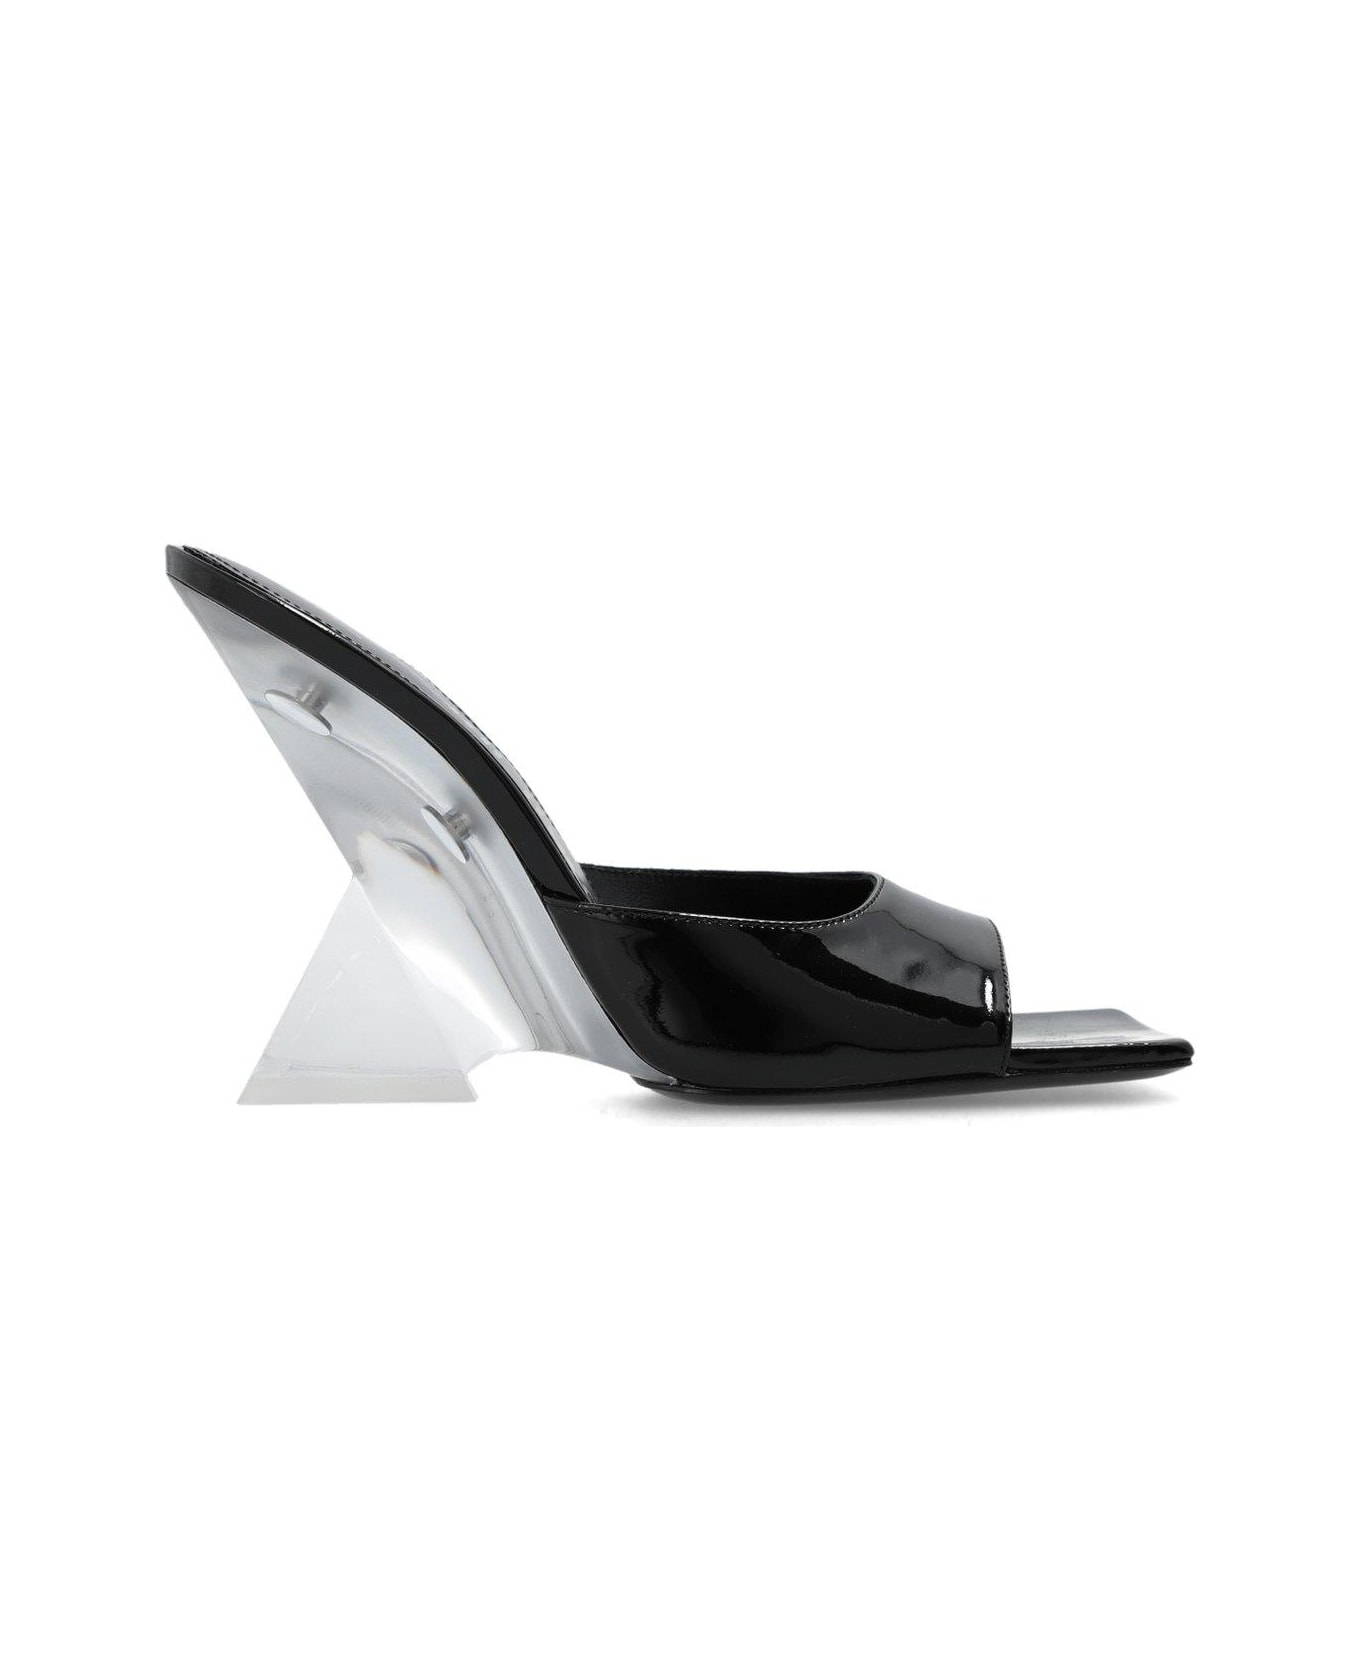 The Attico Cheope Glossy Wedge Square-toe Mules